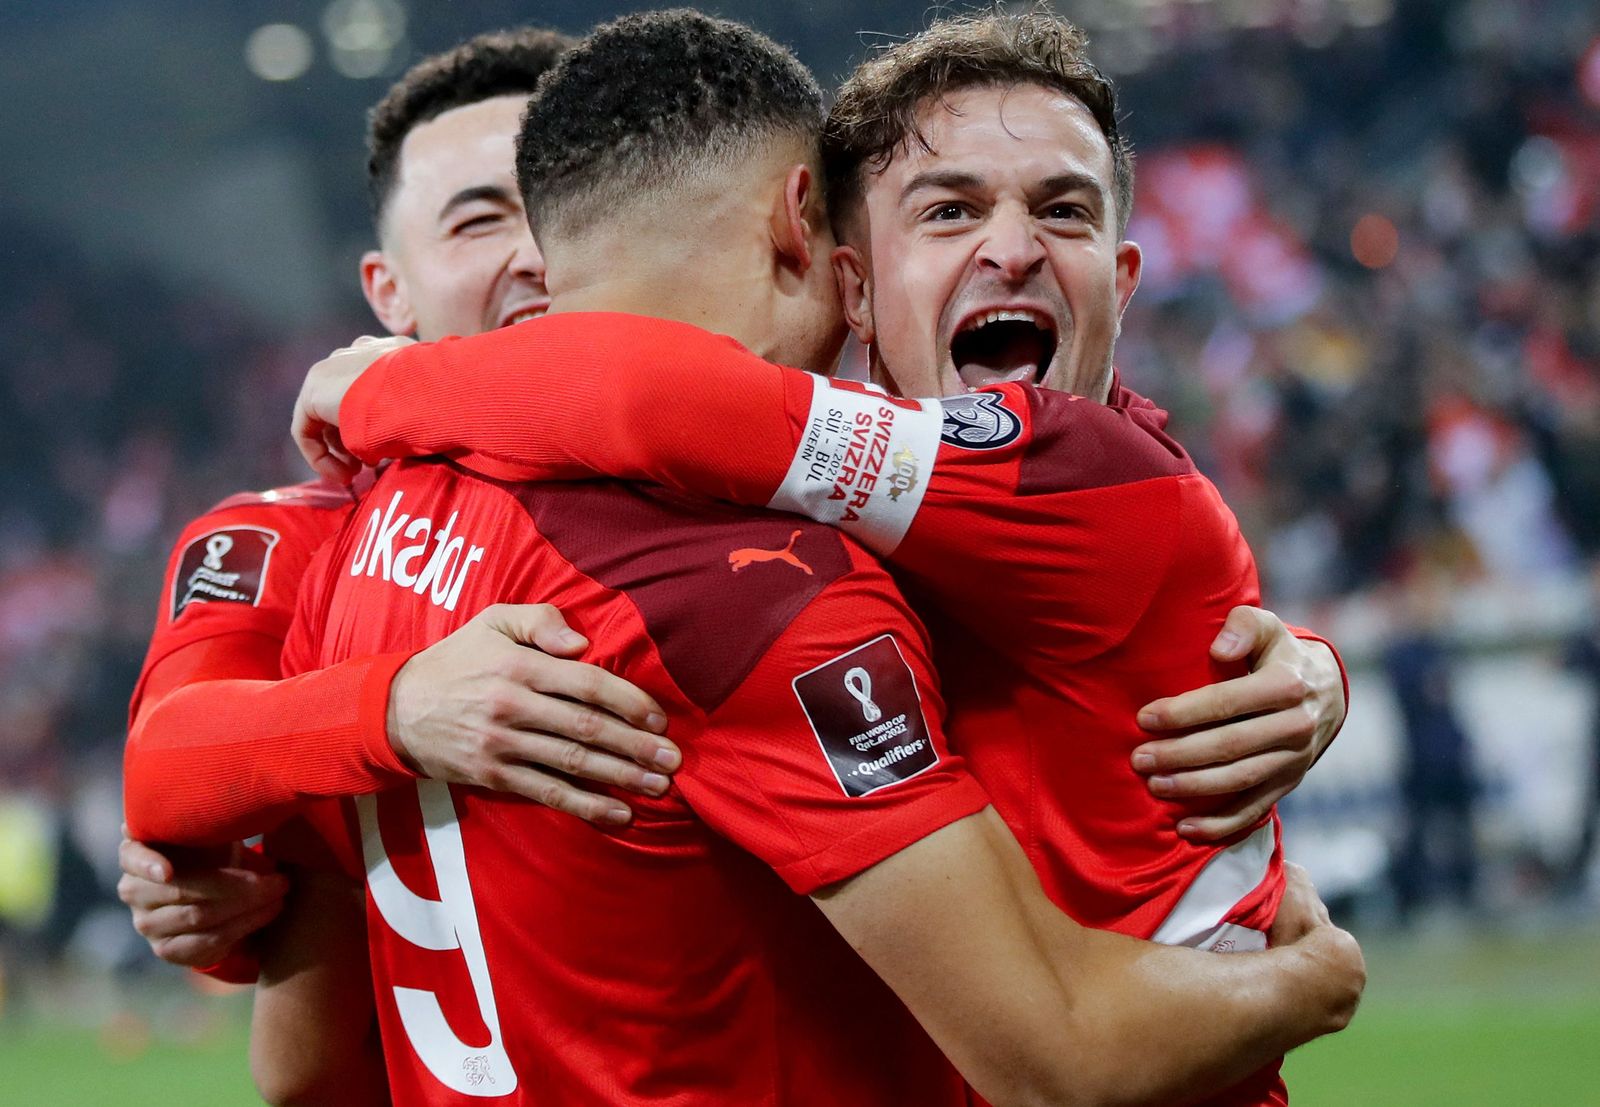 Swiss' midfielder Noah Okafor (C) is congratulated by team mates after scoring a goal during the FIFA 2022 World Cup qualifying group C football match between Switzerland and Bulgaria at the Swissporarena in Lucerne. (Photo by STEFAN WERMUTH / AFP) - AFP